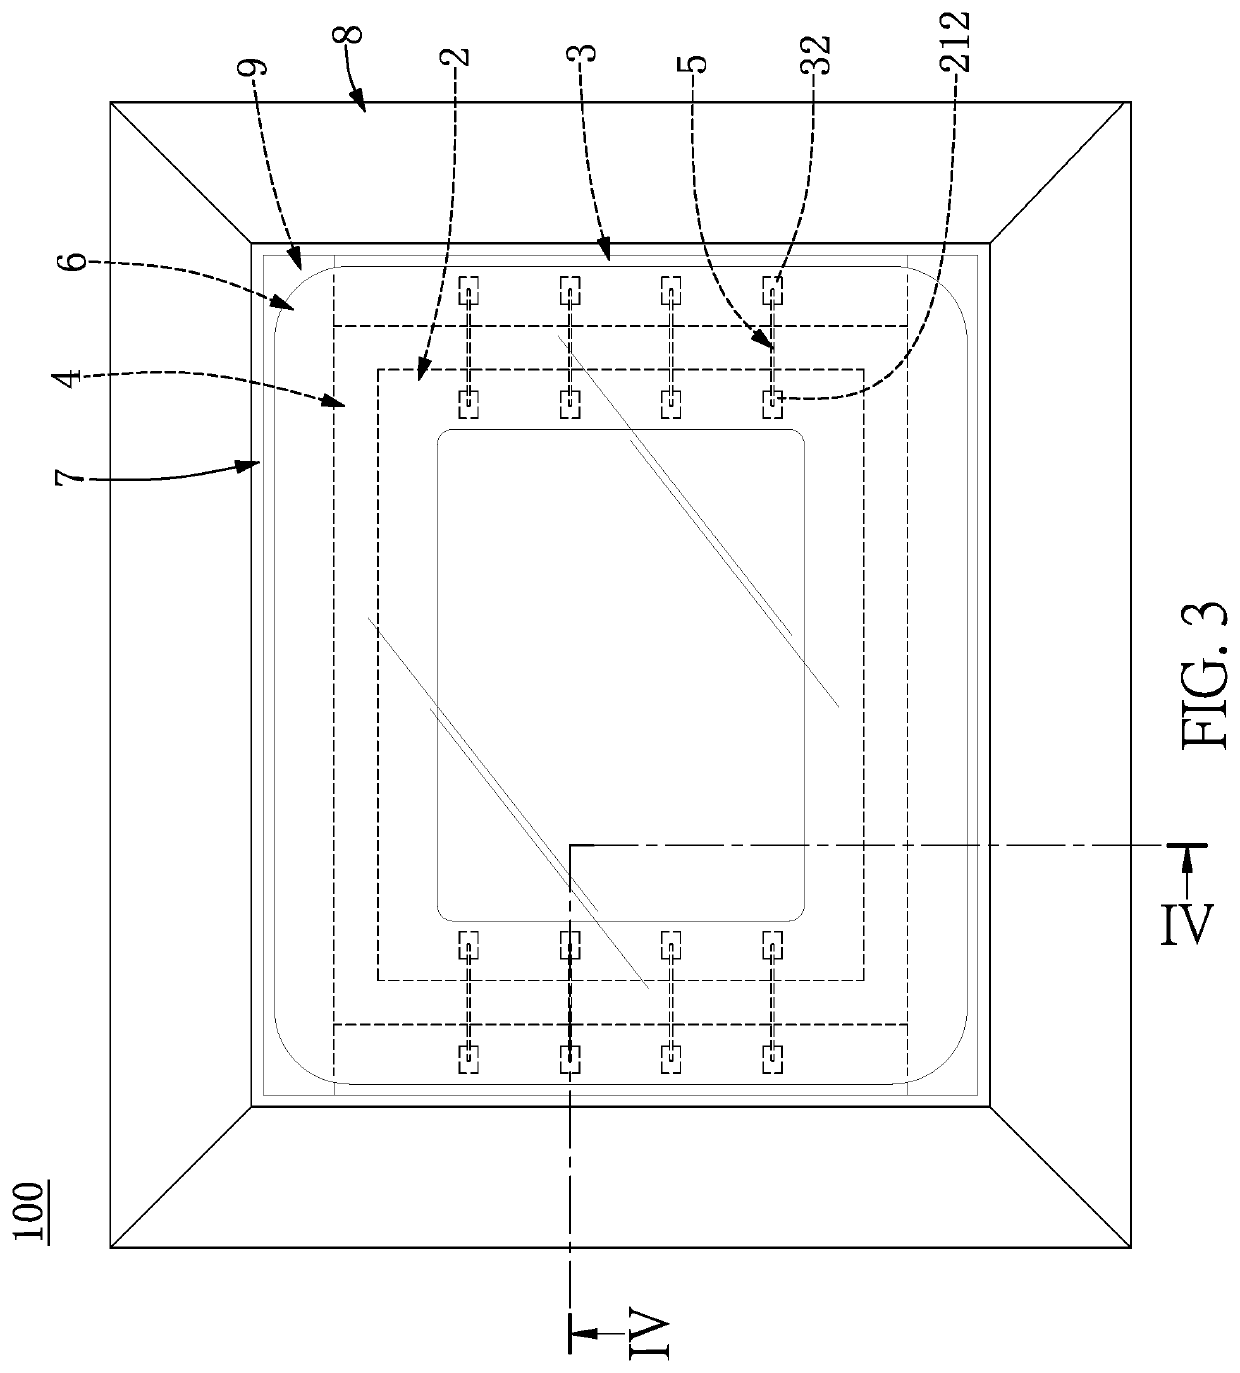 Sensor package structure